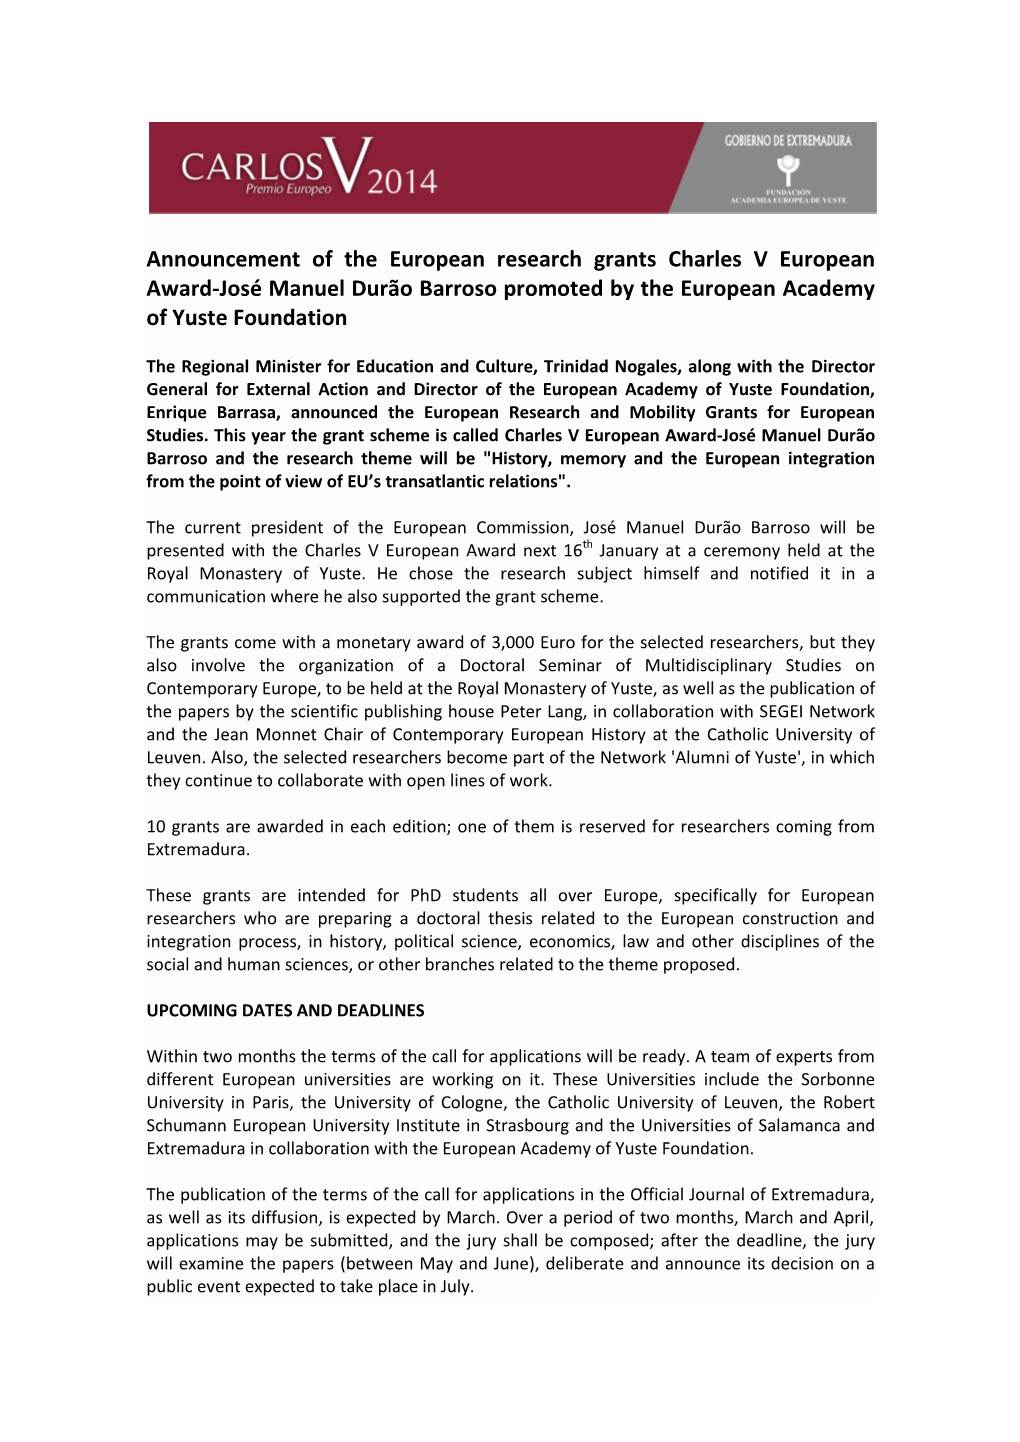 Announcement of the European Research Grants Charles V European Award-José Manuel Durão Barroso Promoted by the European Academy of Yuste Foundation